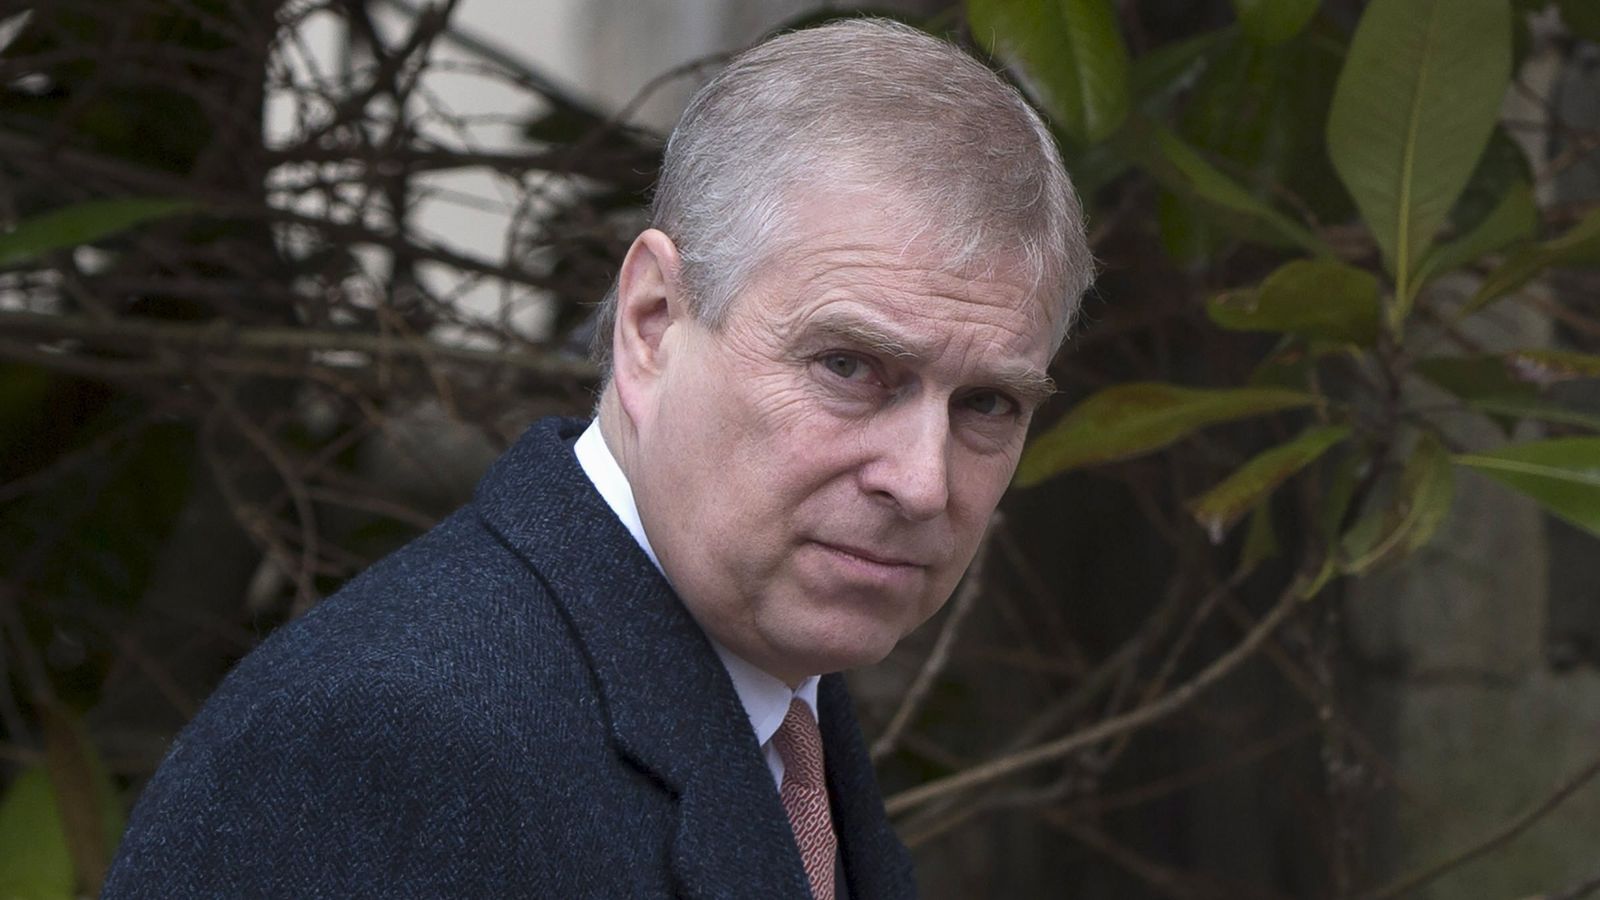 Calls for Prince Andrew to lose dukedom and police protection as Charles refuses to comment